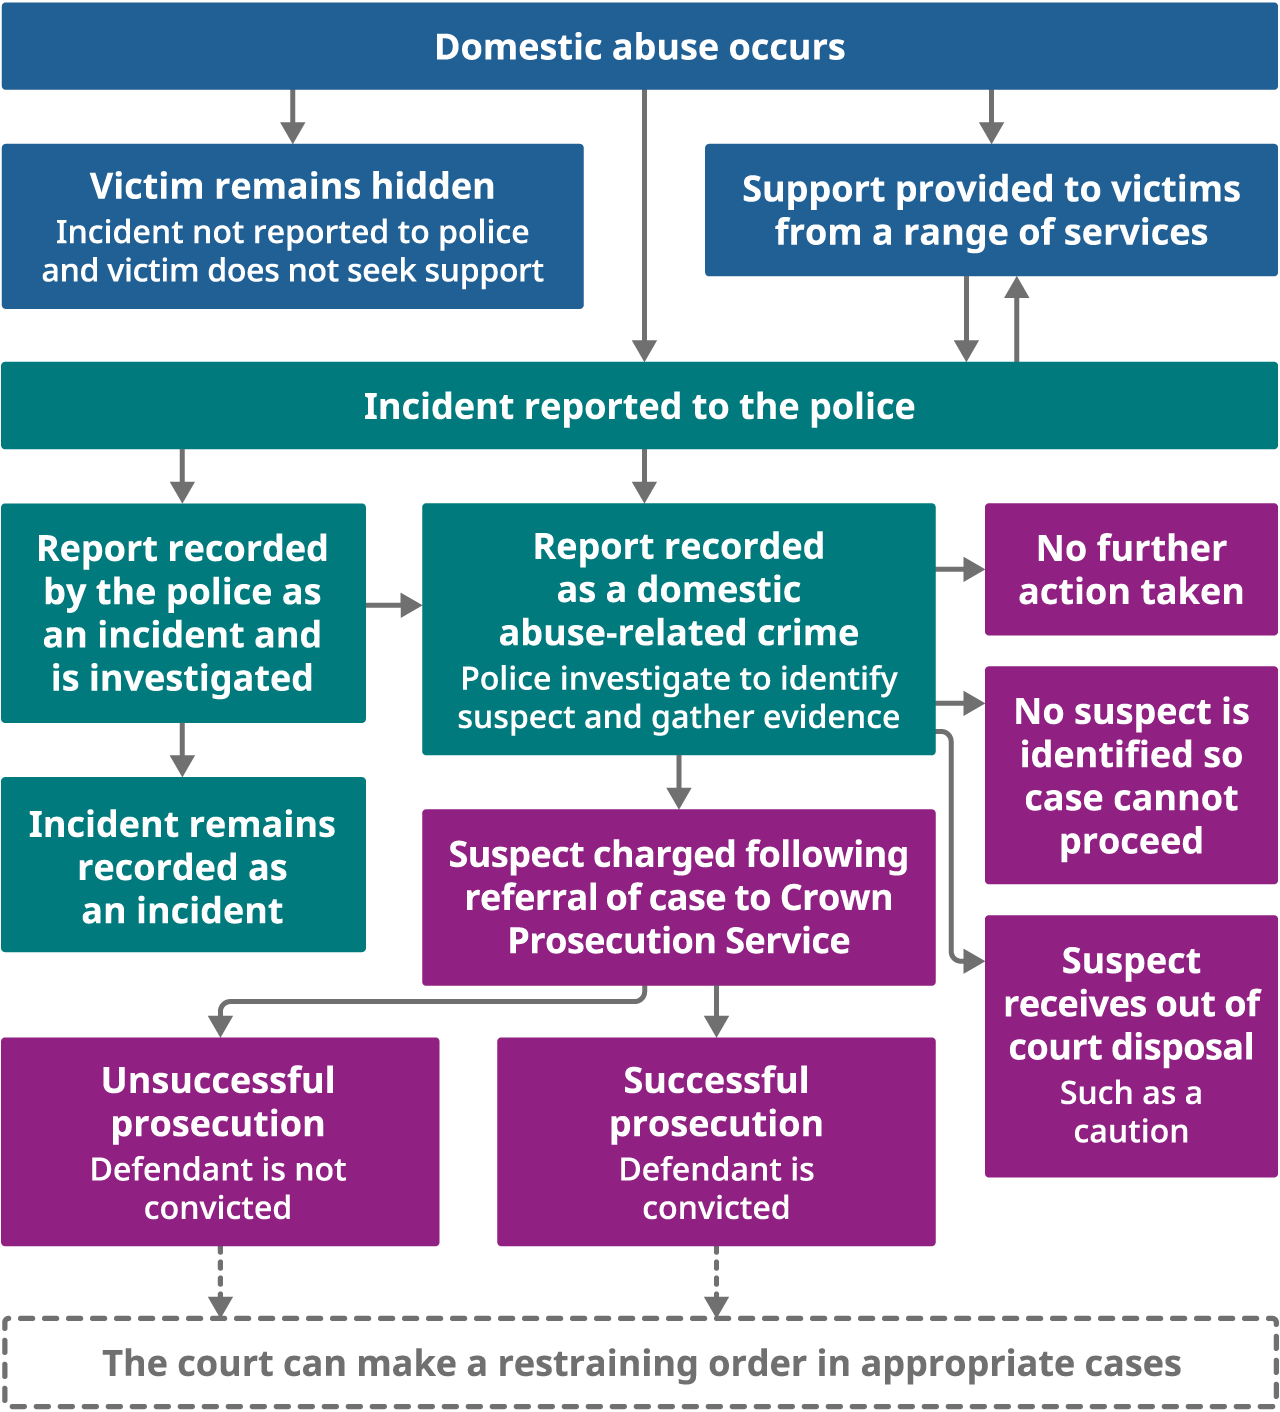 Flowchart shows an overview of how cases of domestic abuse are captured and flow through the criminal justice system.